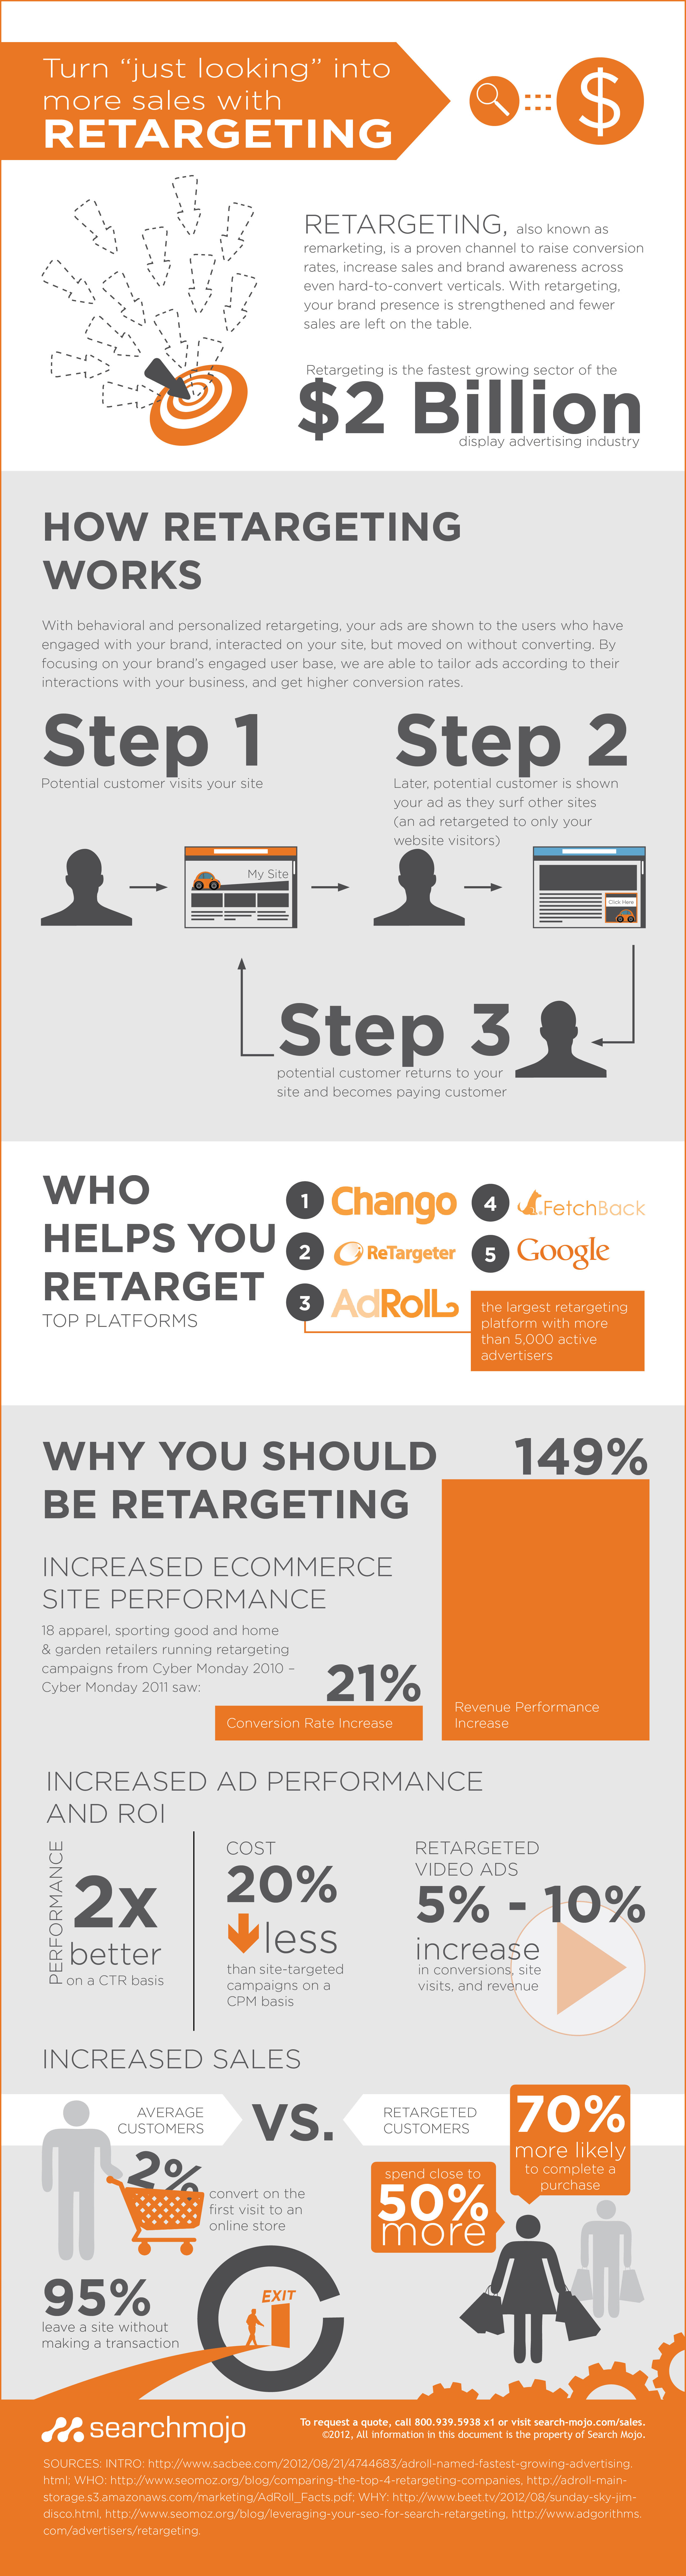 Turn Just Looking Into More Sales with Retargeting